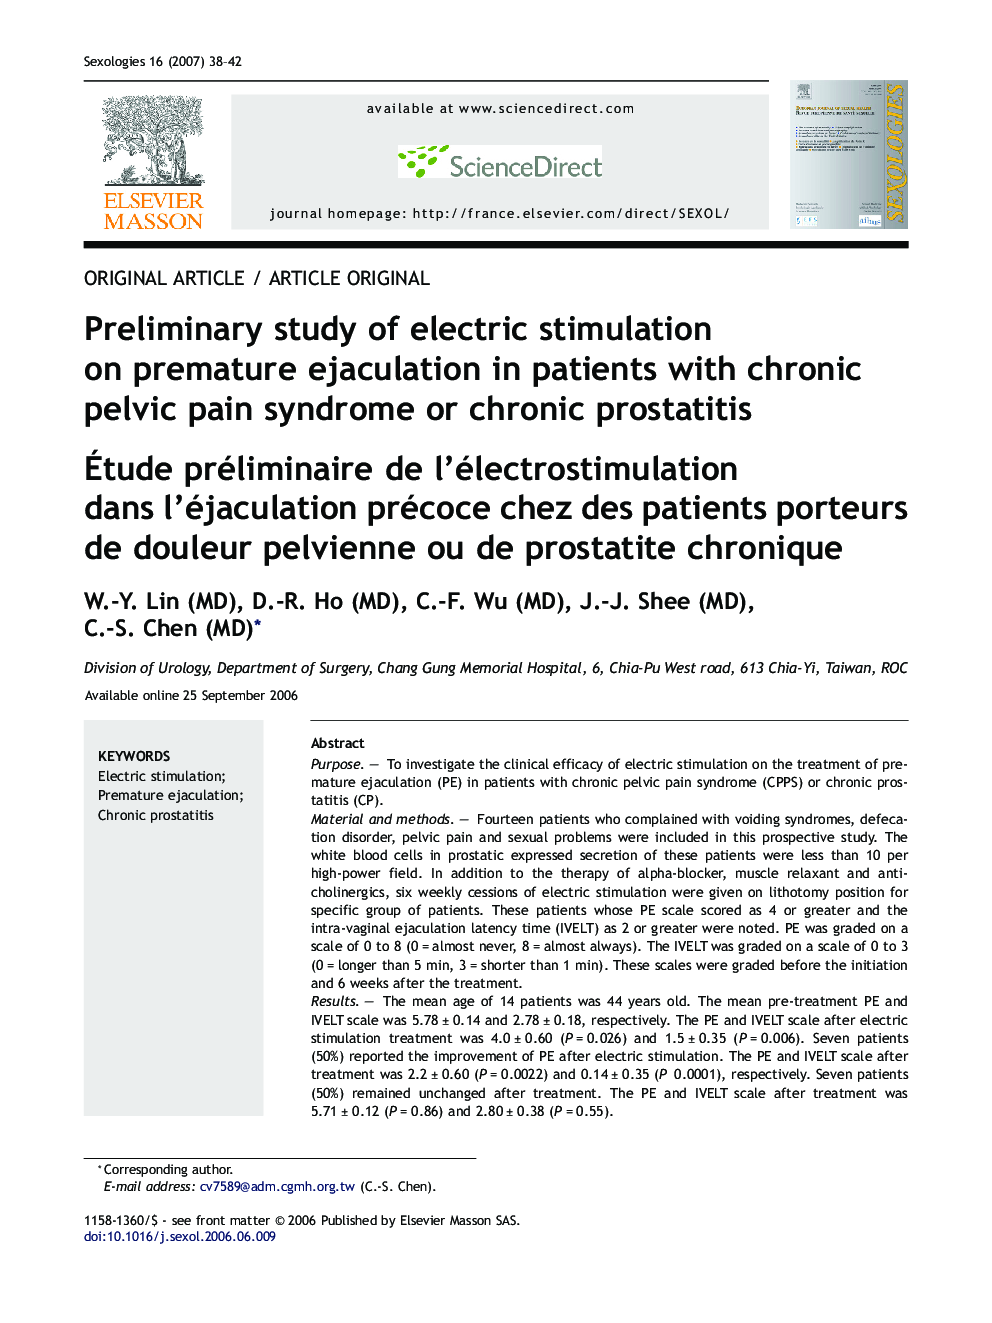 Preliminary study of electric stimulation on premature ejaculation in patients with chronic pelvic pain syndrome or chronic prostatitis